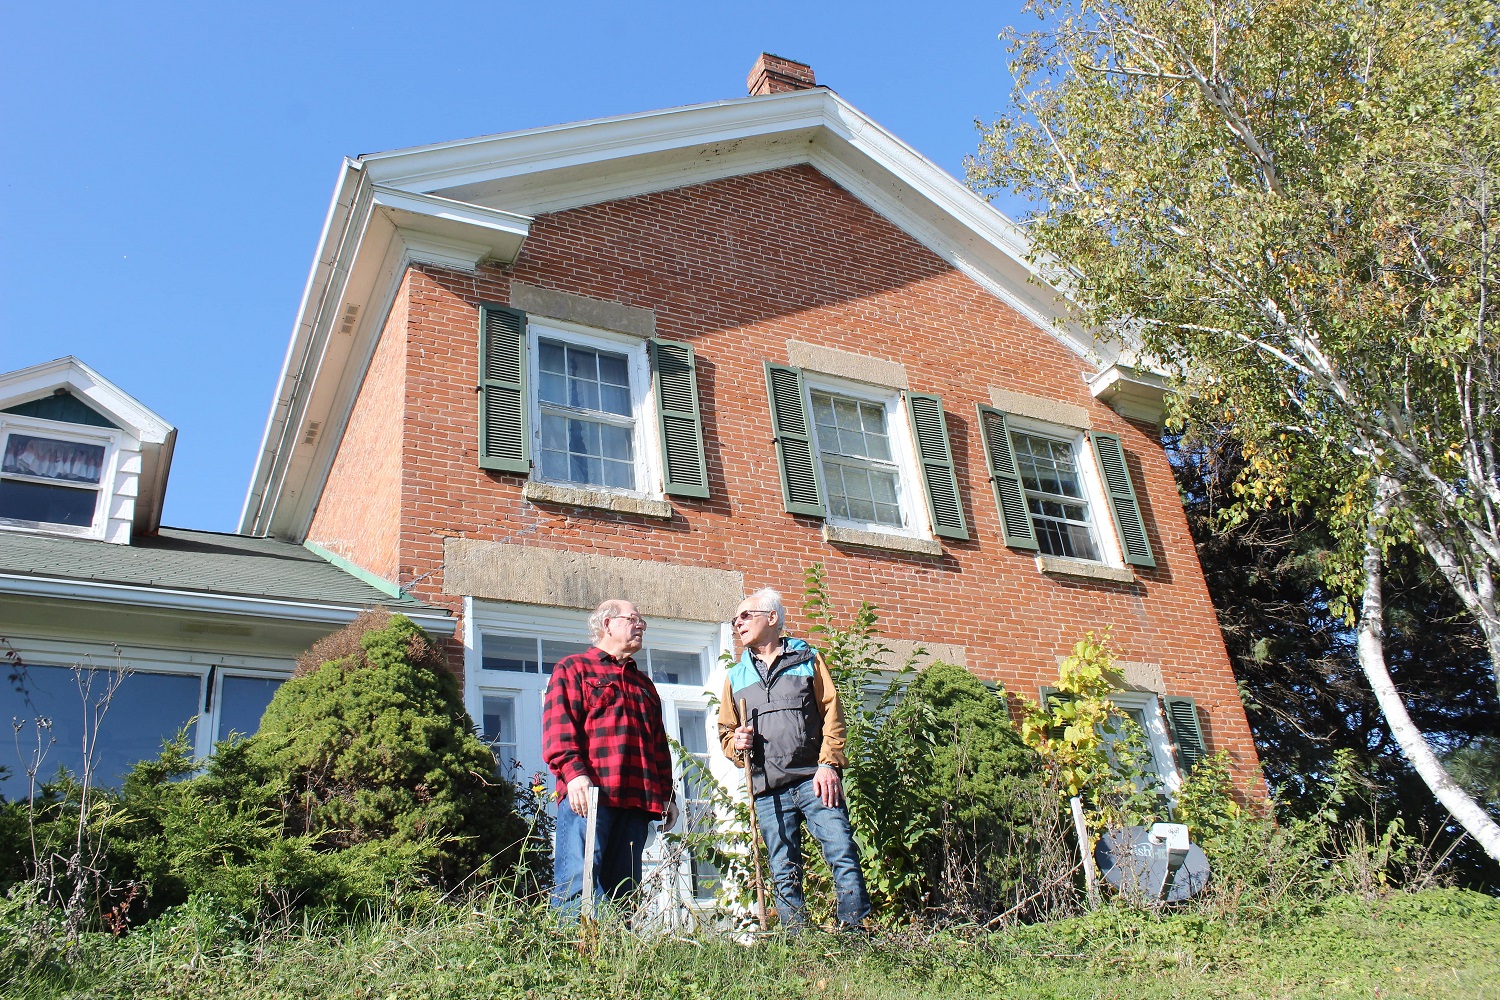 Chase and Klein stand in front of the historic Thompson-Schneider home